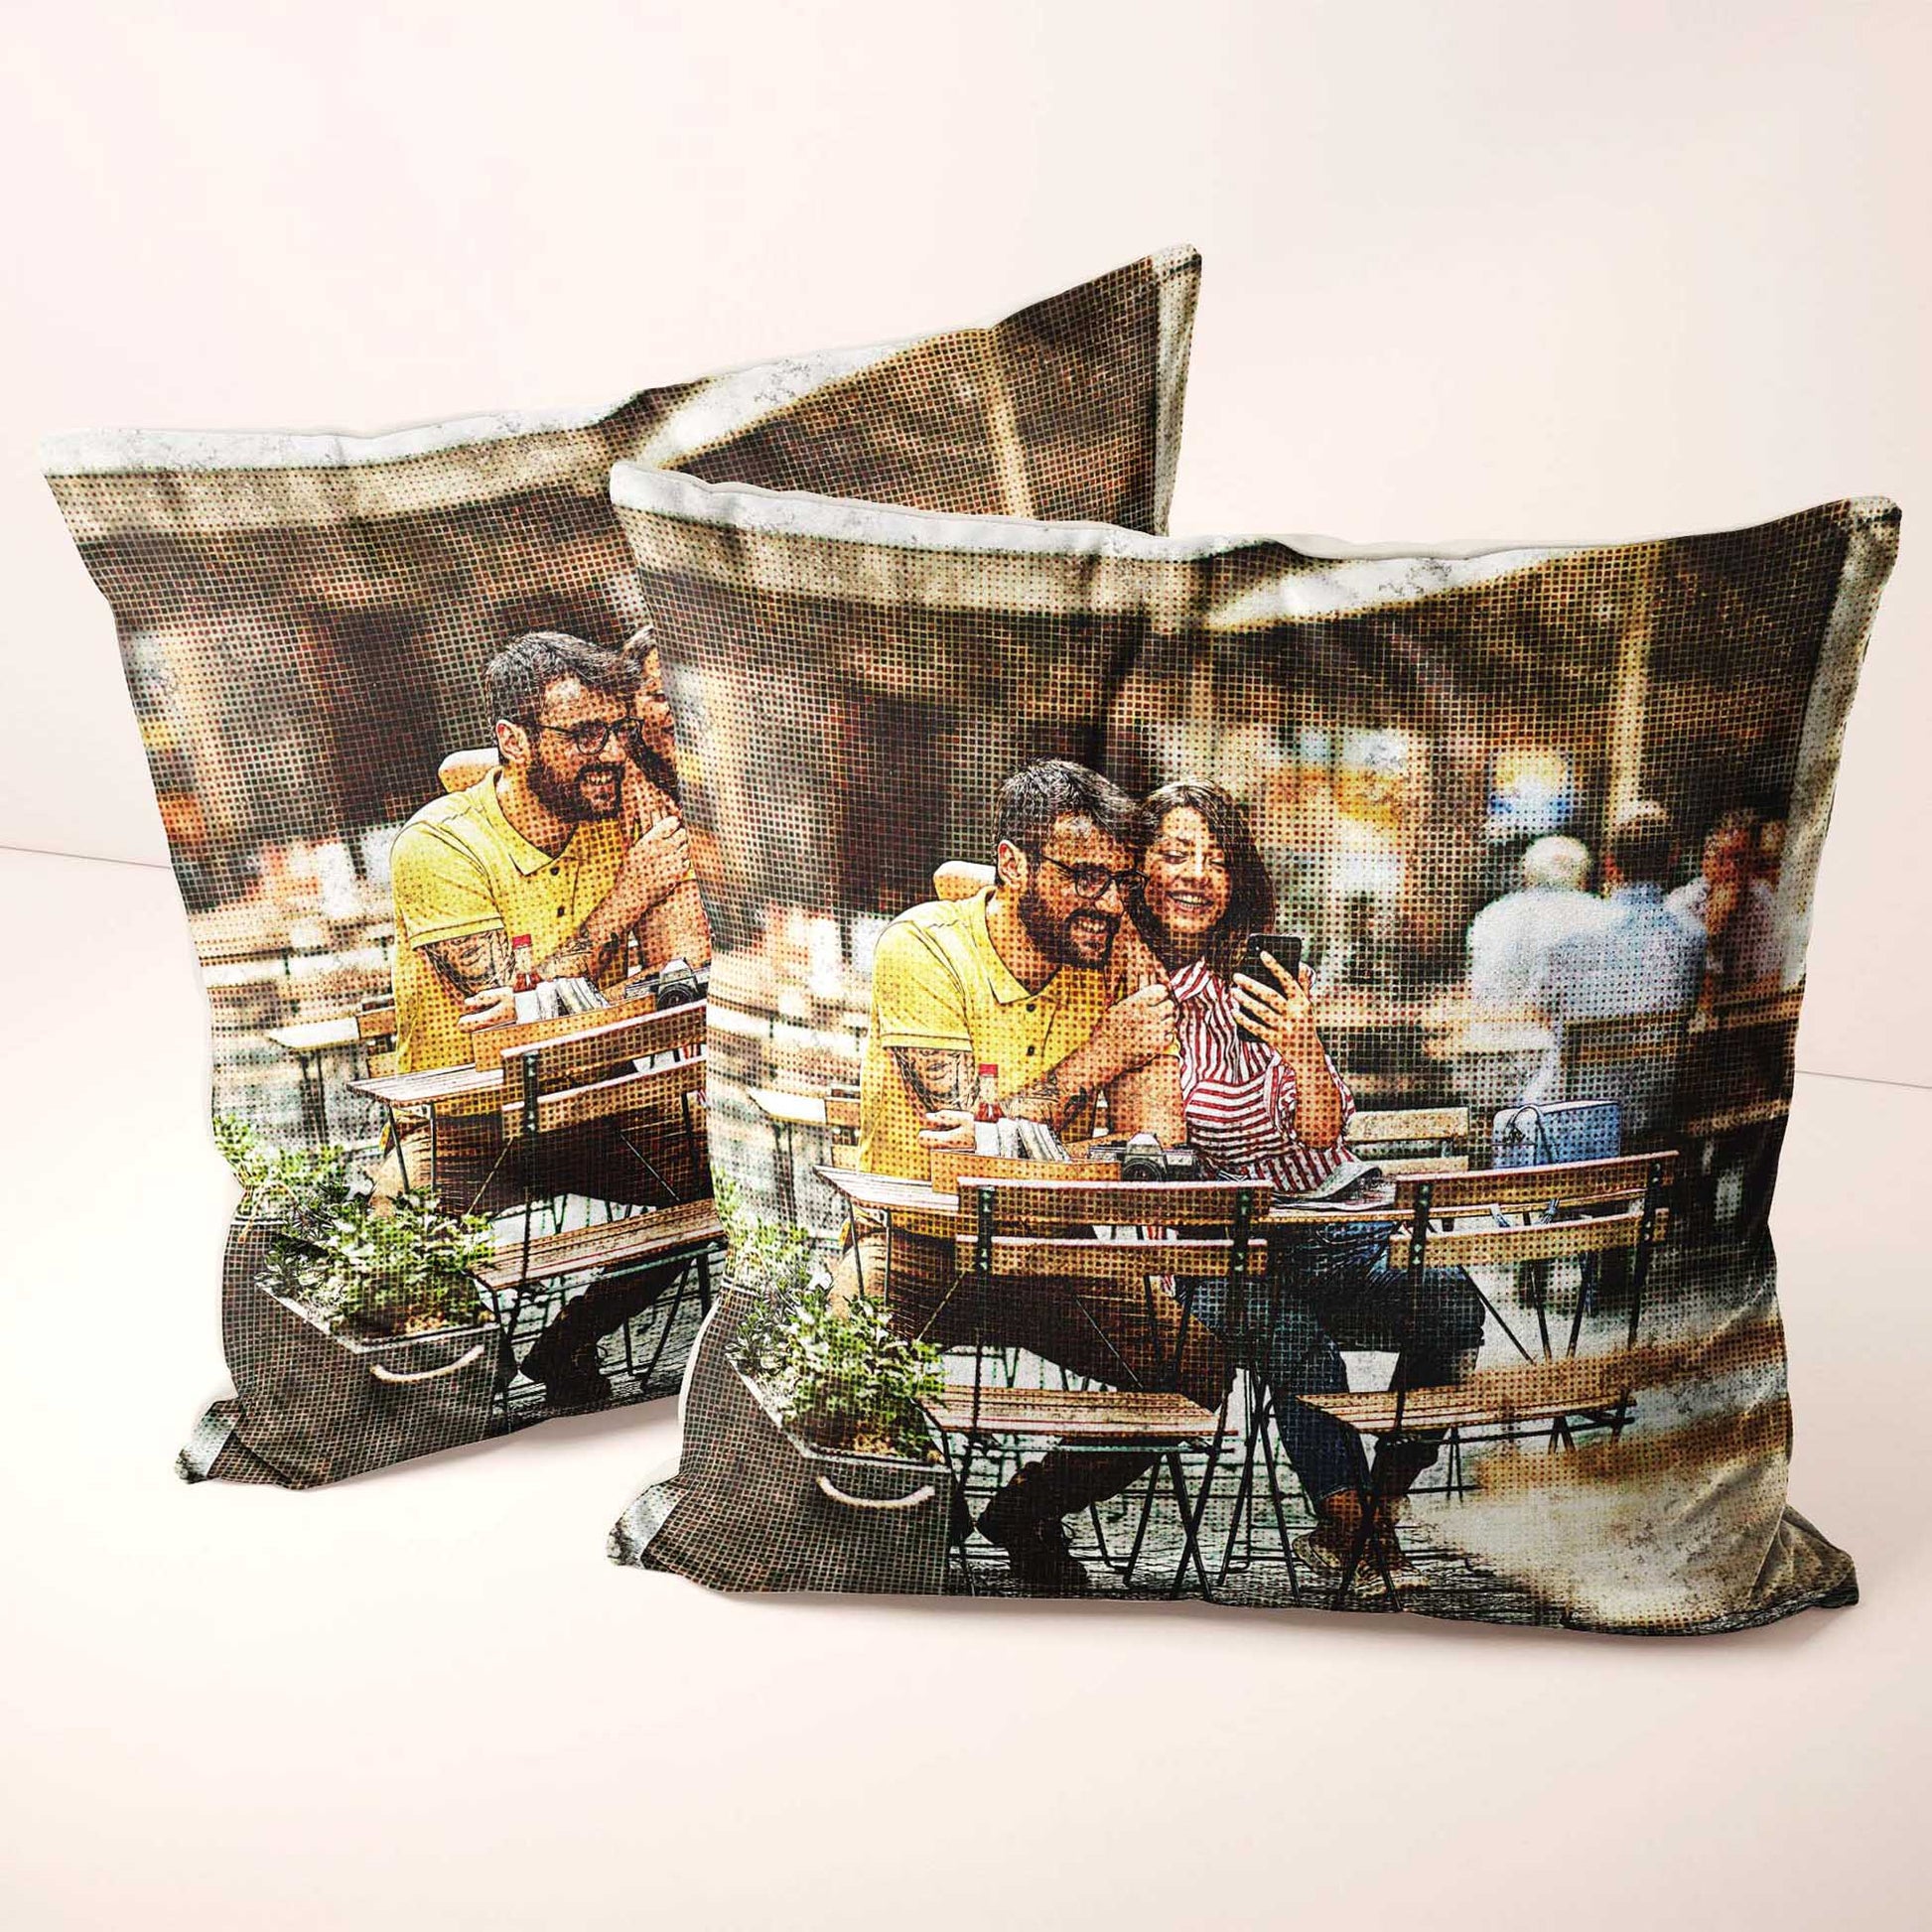 Make a statement with the Personalised Grunge FX Cushion, a creative masterpiece for art enthusiasts. Its distressed print from your photo adds a unique and original touch, while the soft velvet material offers a luxurious feel. Handmade 